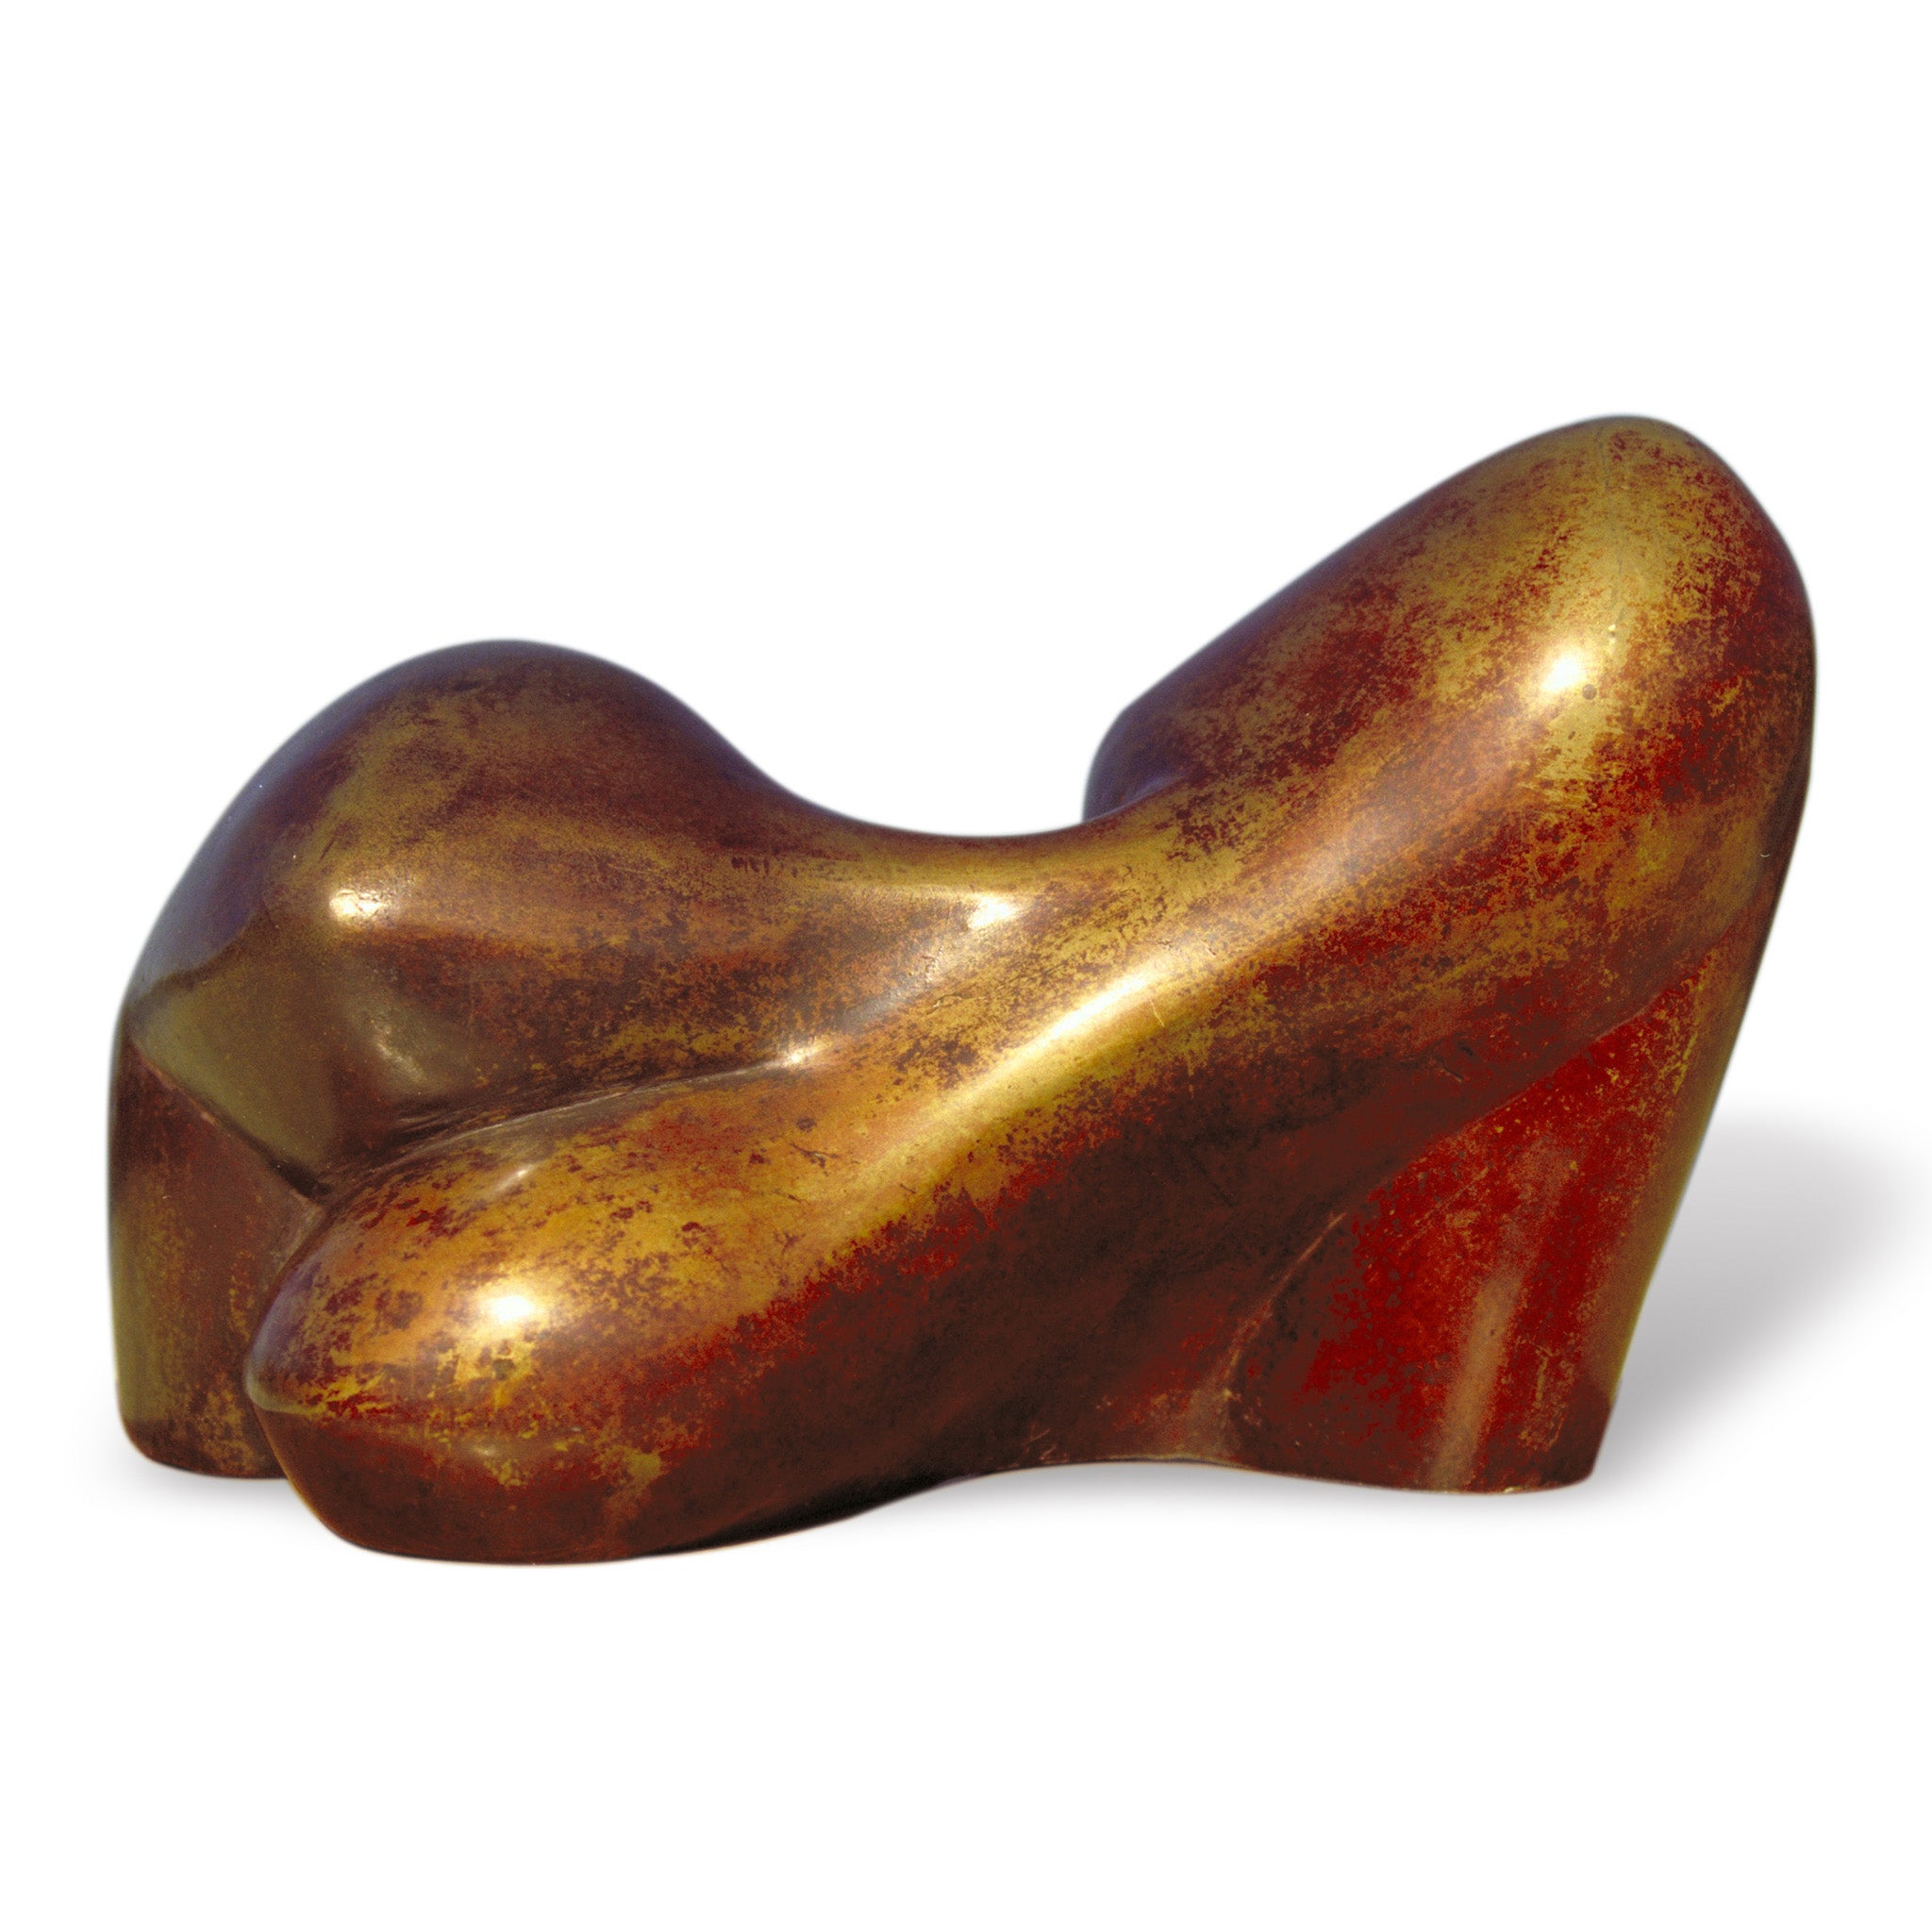 Reclining abstract female figurative bronze sculpture by Stephen Williams.